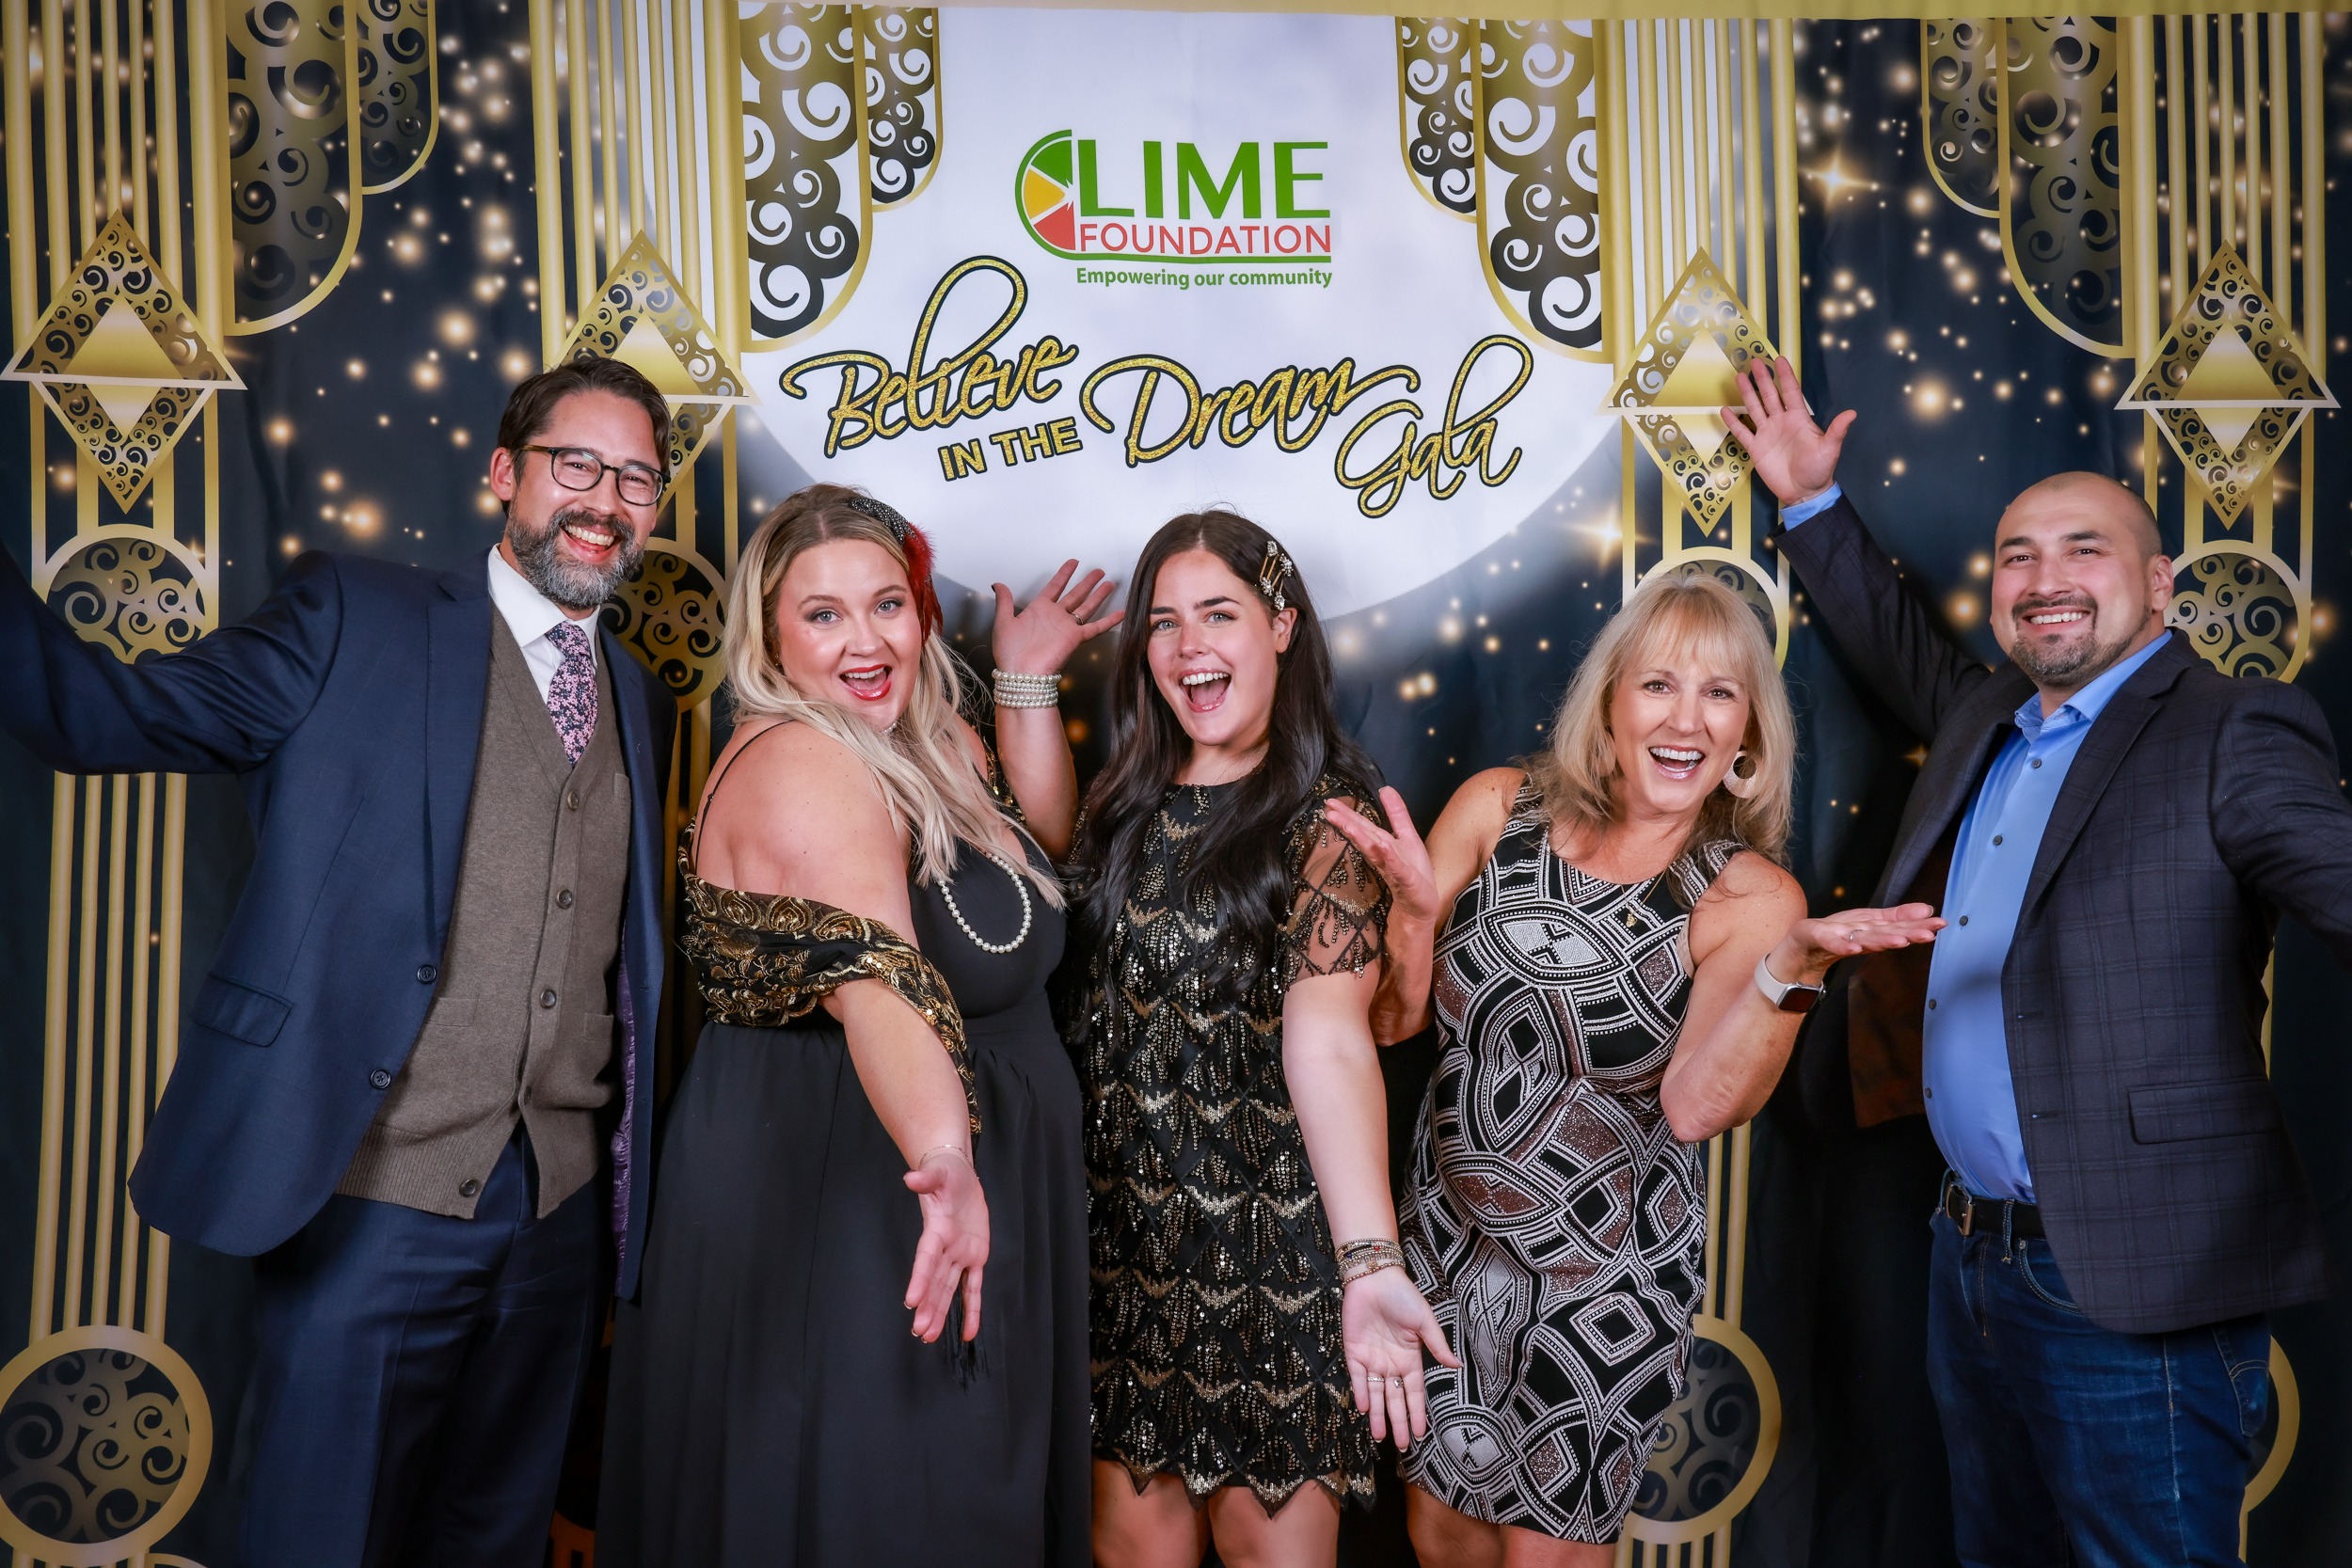 A group of people posing for a photo in front of a gilded backdrop at an event hosted by The LIME Foundation of Santa Rosa.